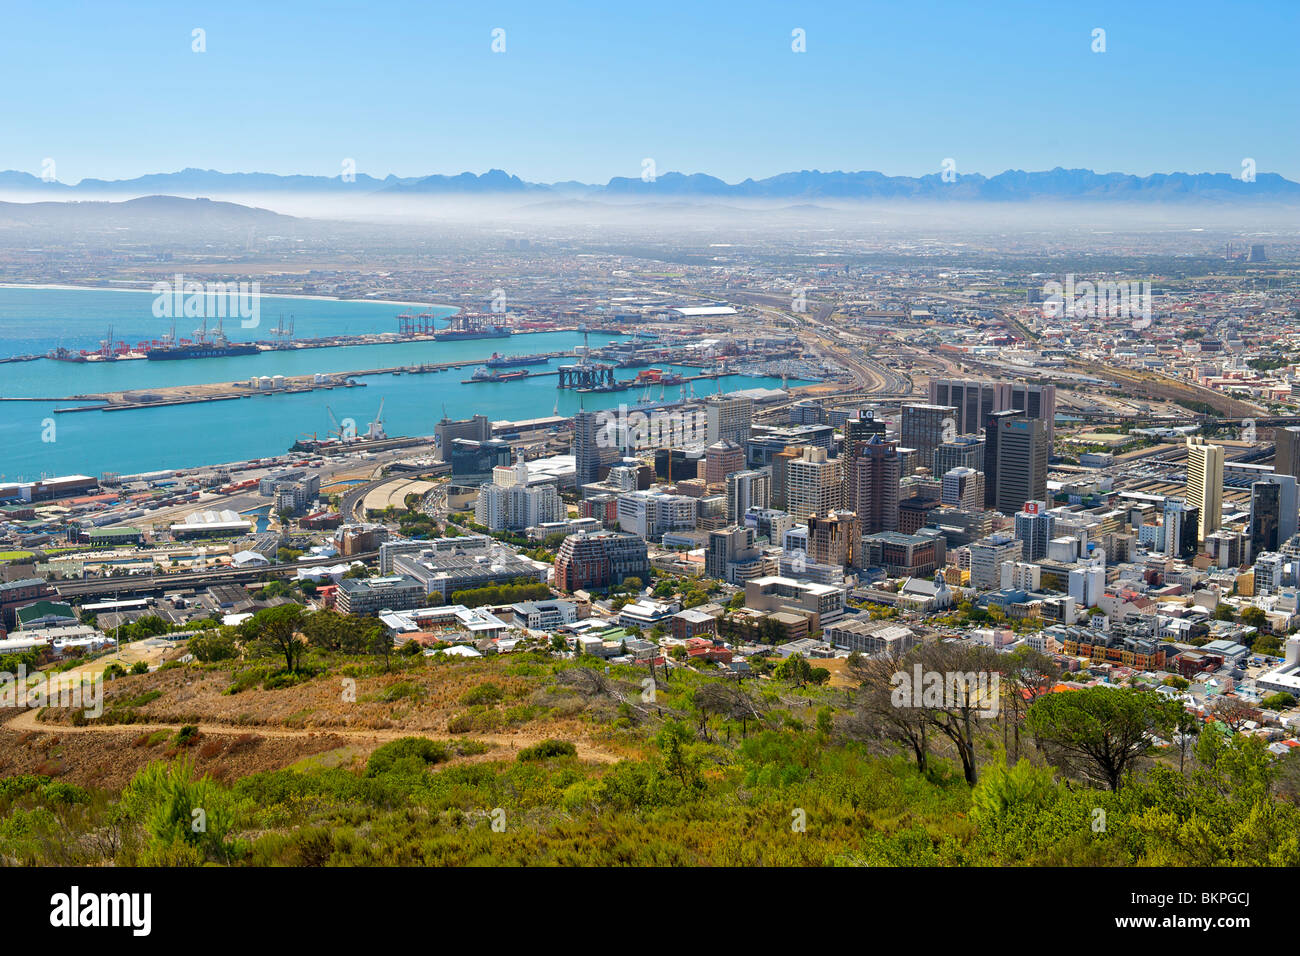 View of the city of Cape Town from Signal Hill showing the CBD, the harbour and the Hottentots Holland mountains. Stock Photo